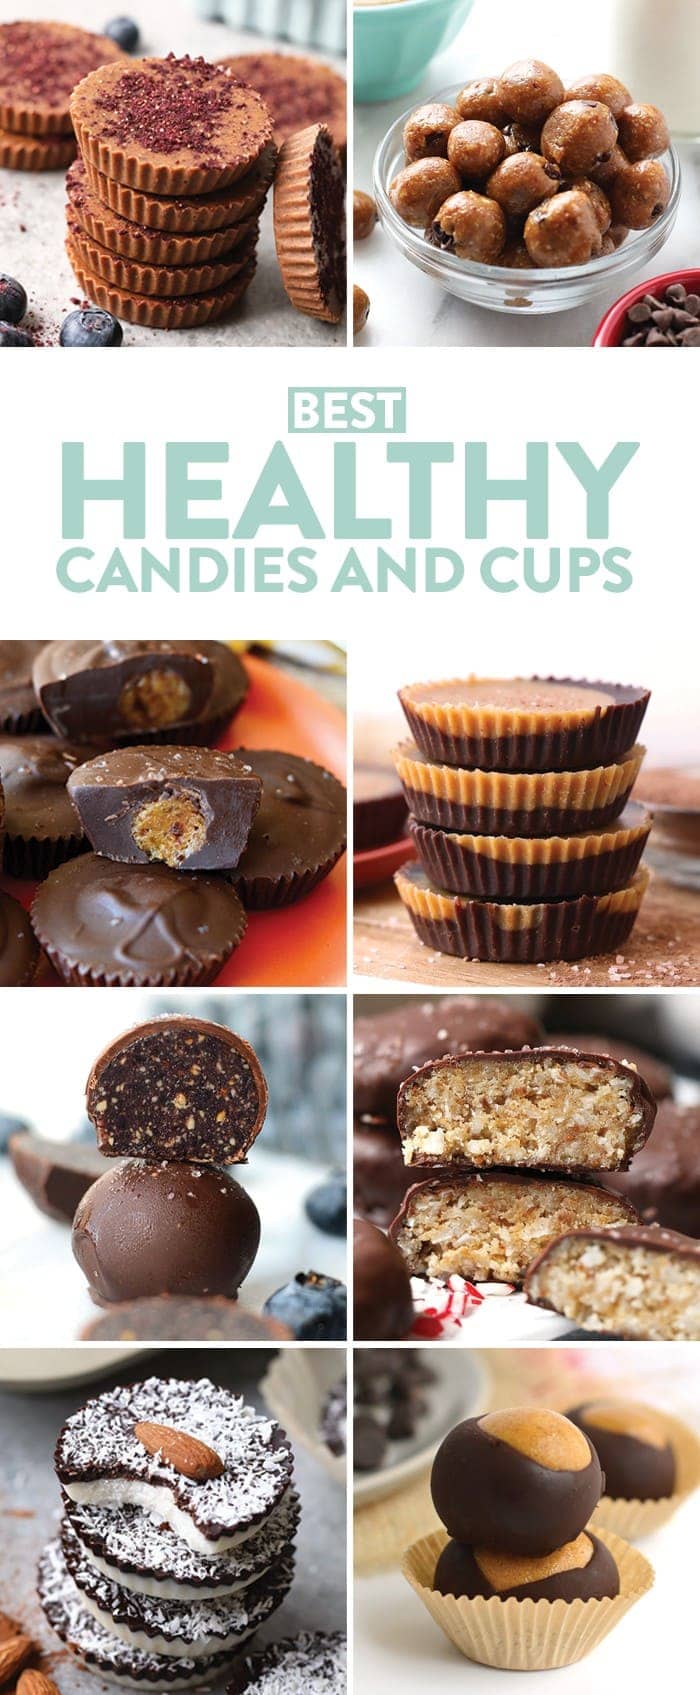 Healthy candies and cups